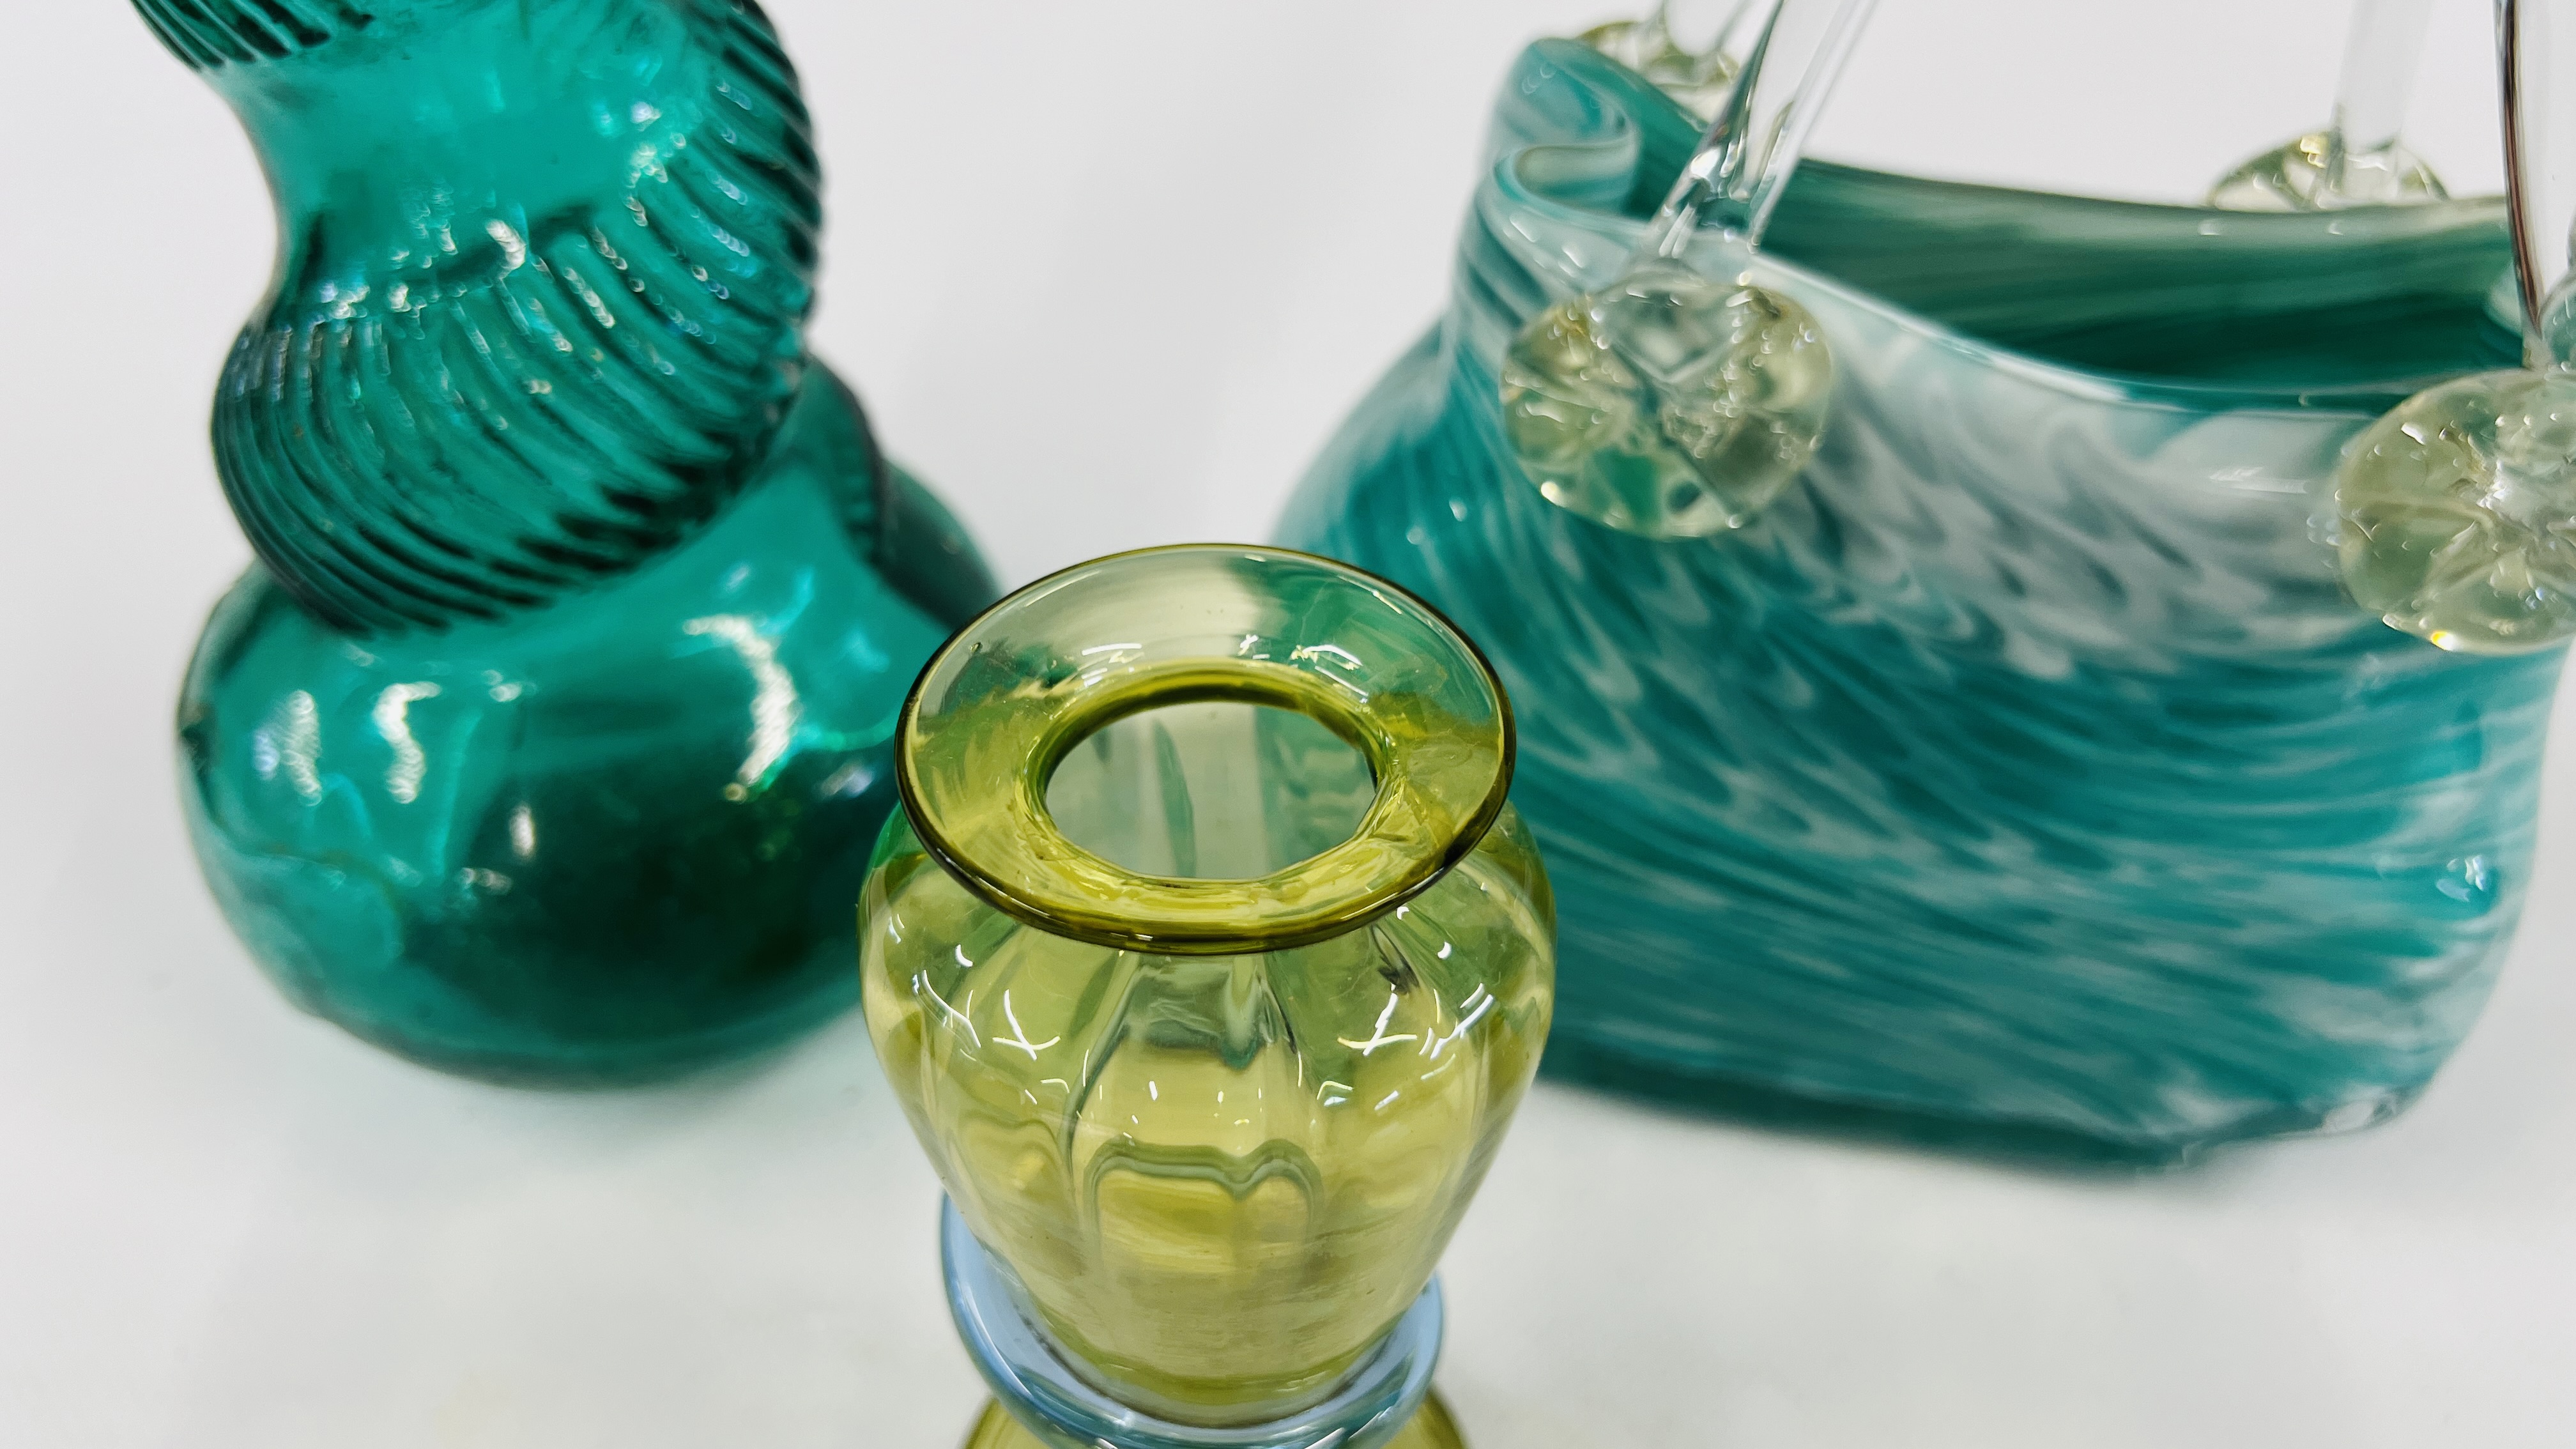 A VINTAGE GREEN GLASS BOTTLE MARKED "SHONFELDS" ALONG WITH AN ART GLASS BASKET AND A VICTORIAN - Image 4 of 7